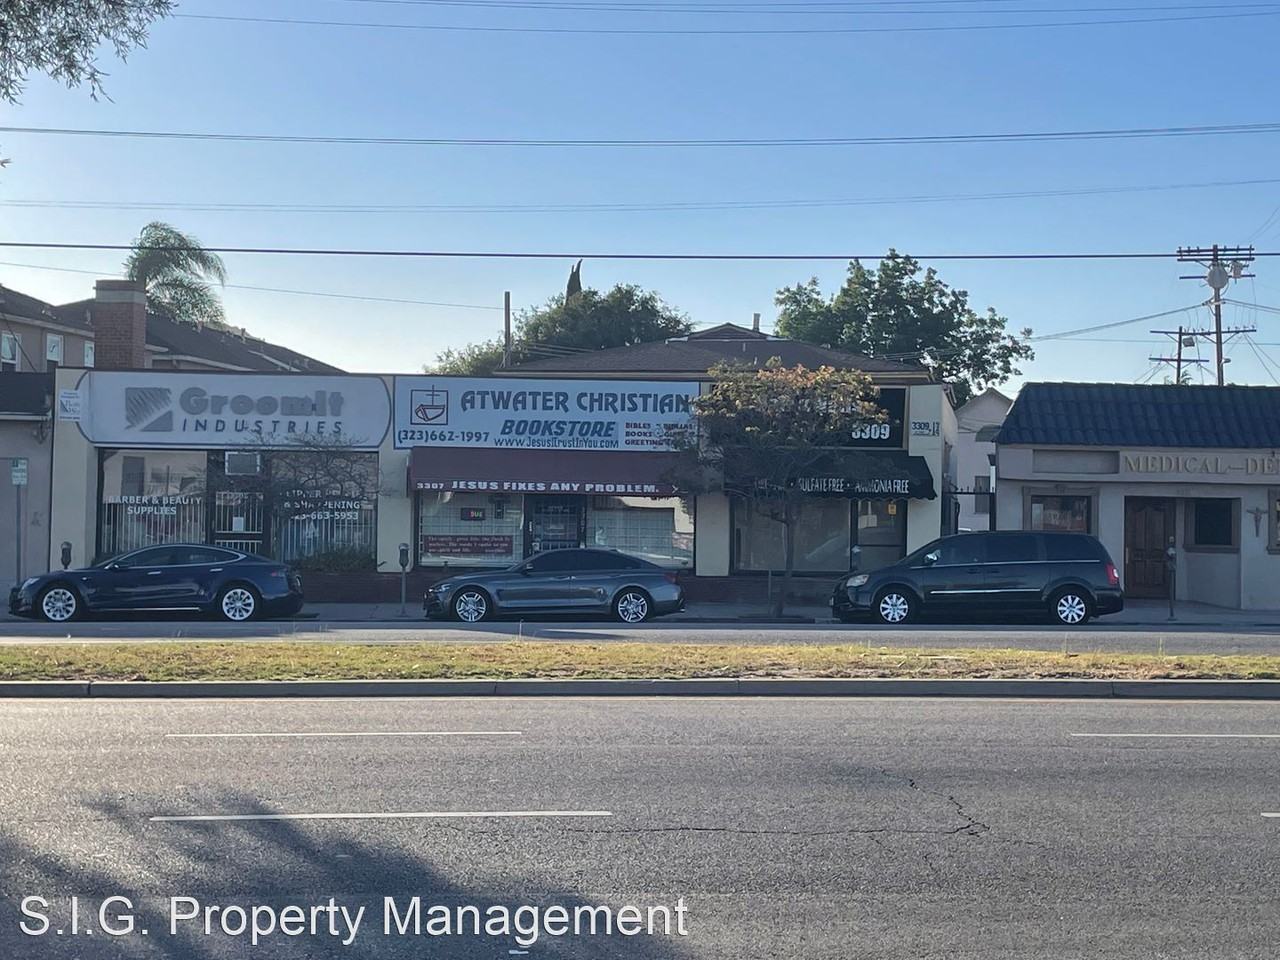 2930 Beverly Blvd Los Angeles, CA 90057 - Retail Property for Lease on